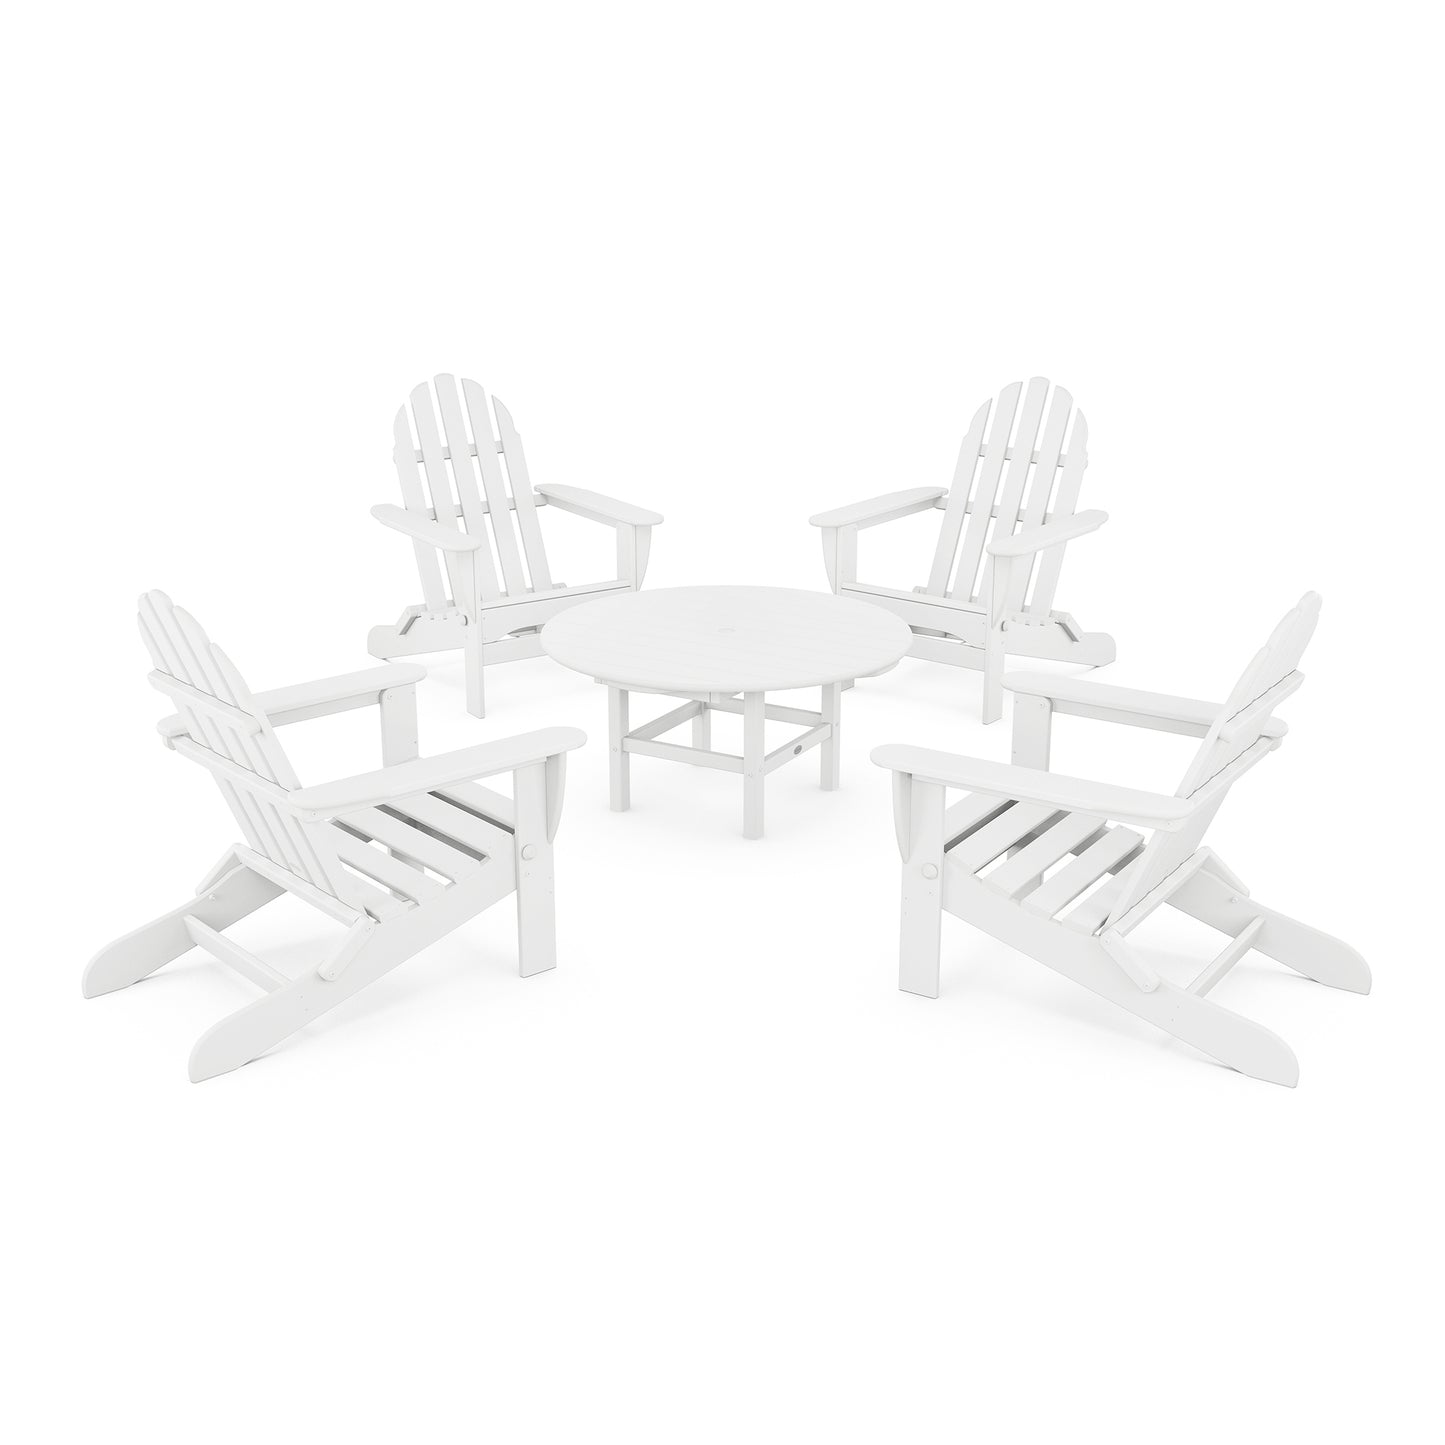 A set of four white POLYWOOD Classic Folding Adirondack chairs arranged around a small round table, all positioned on a plain white background.